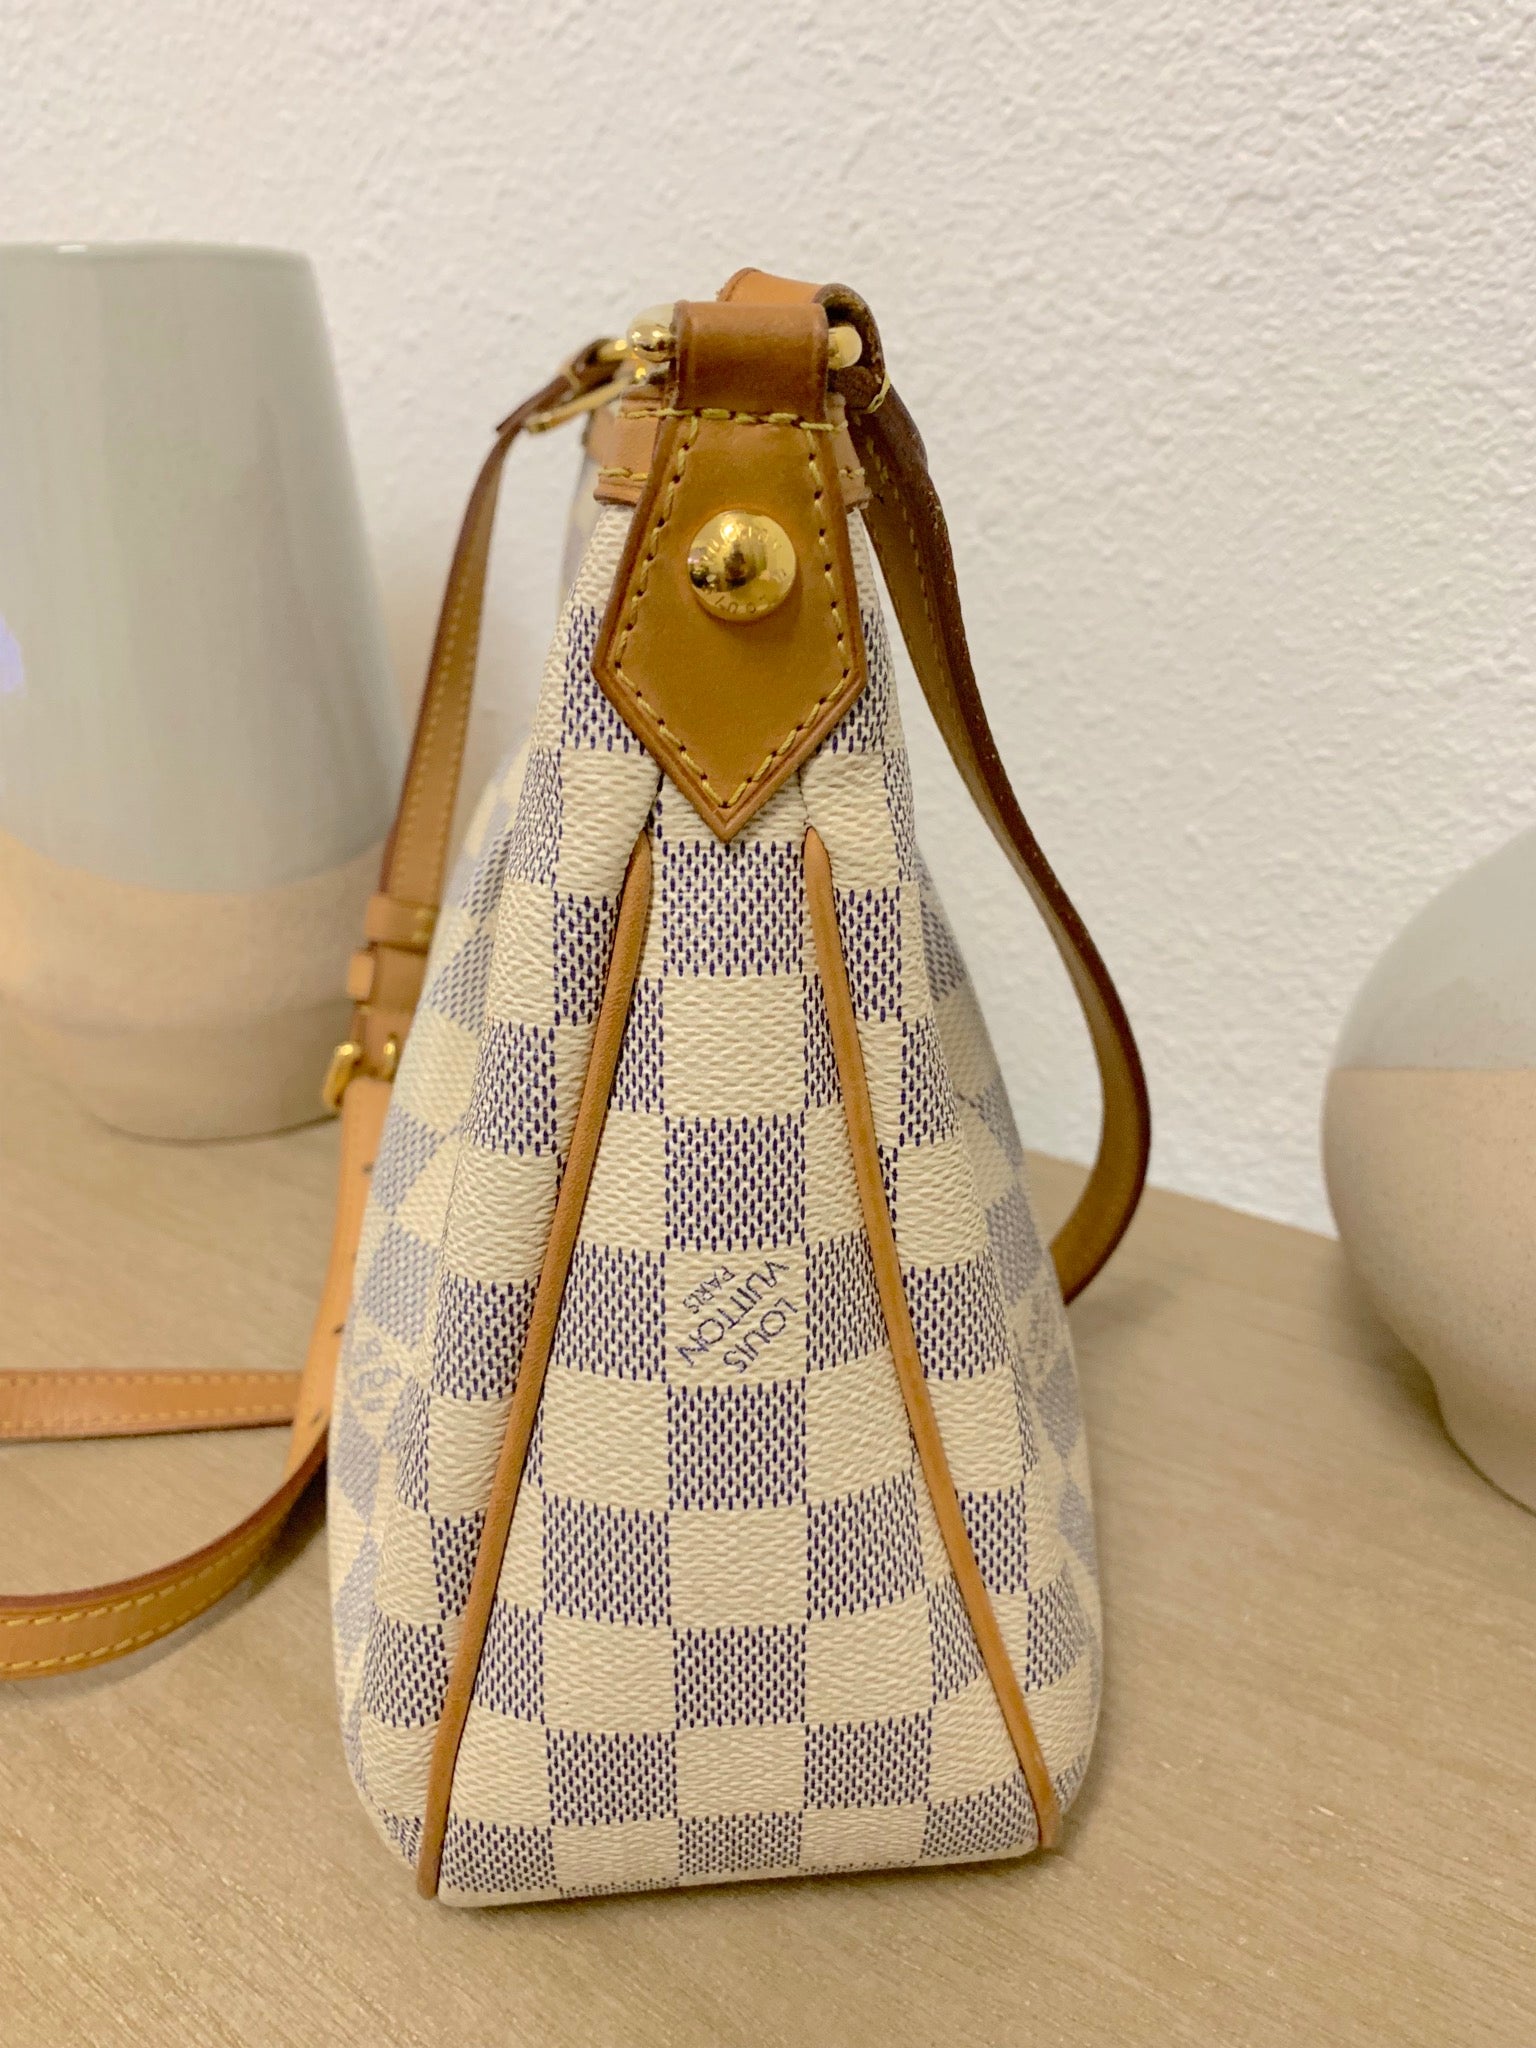 Louis Vuitton, Bags, Auth New Louis Vuitton Neverfull Pm Damier  Discontinued